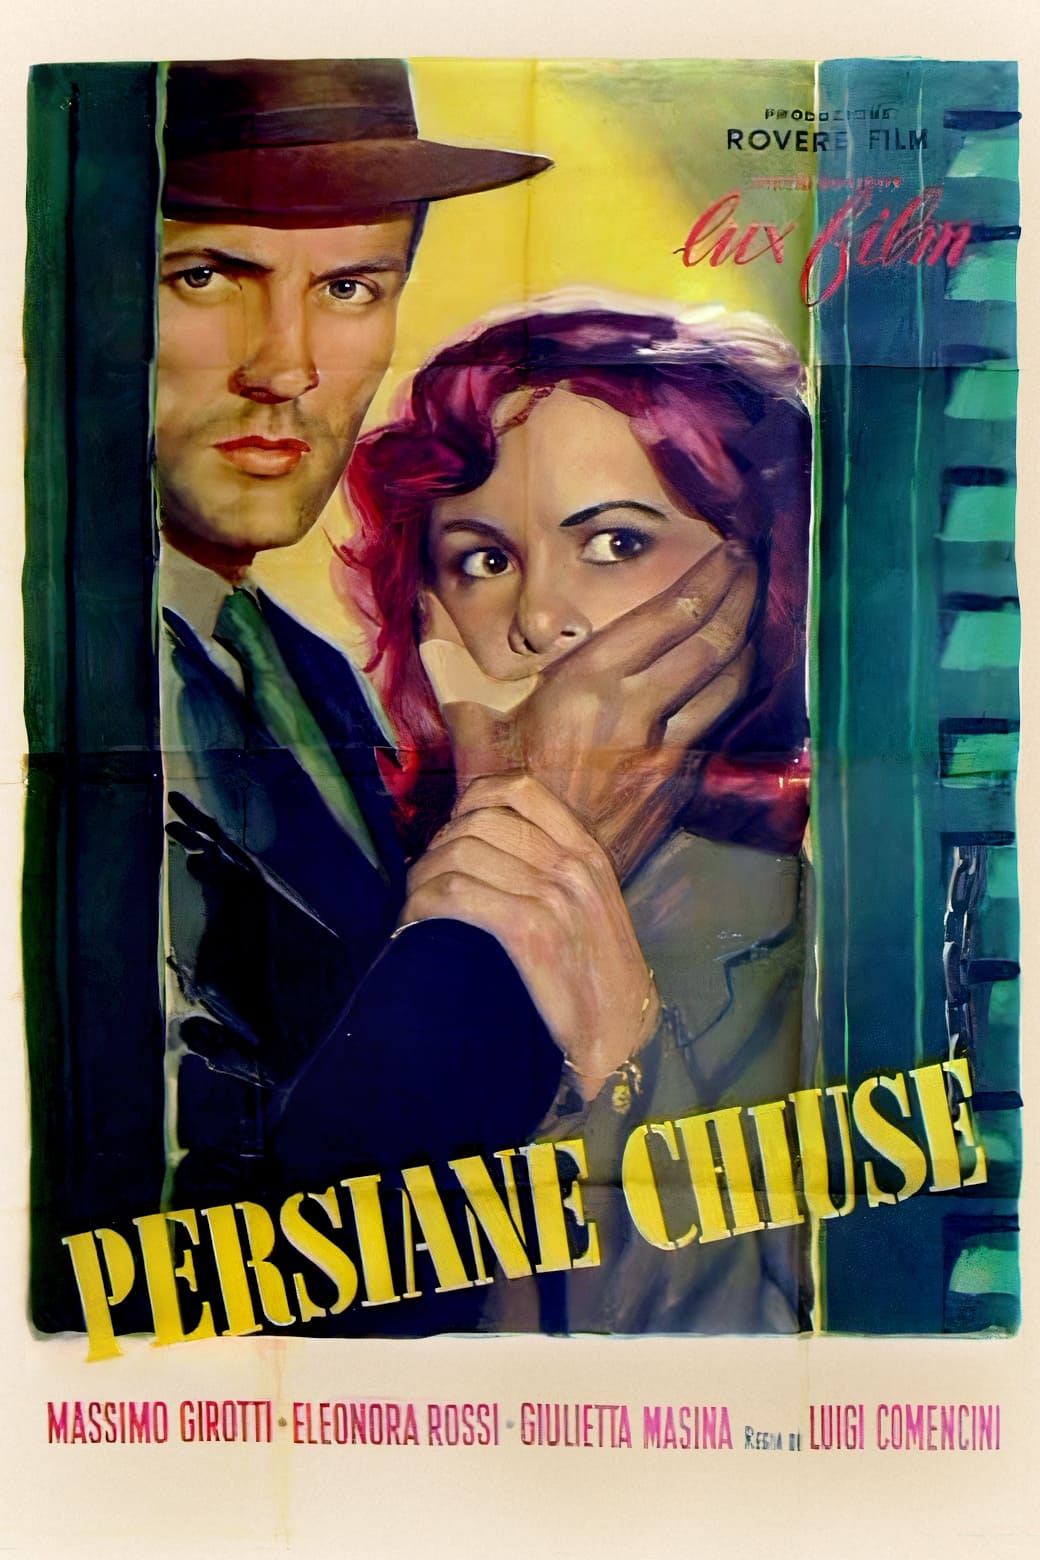 Behind Closed Shutters (1951)